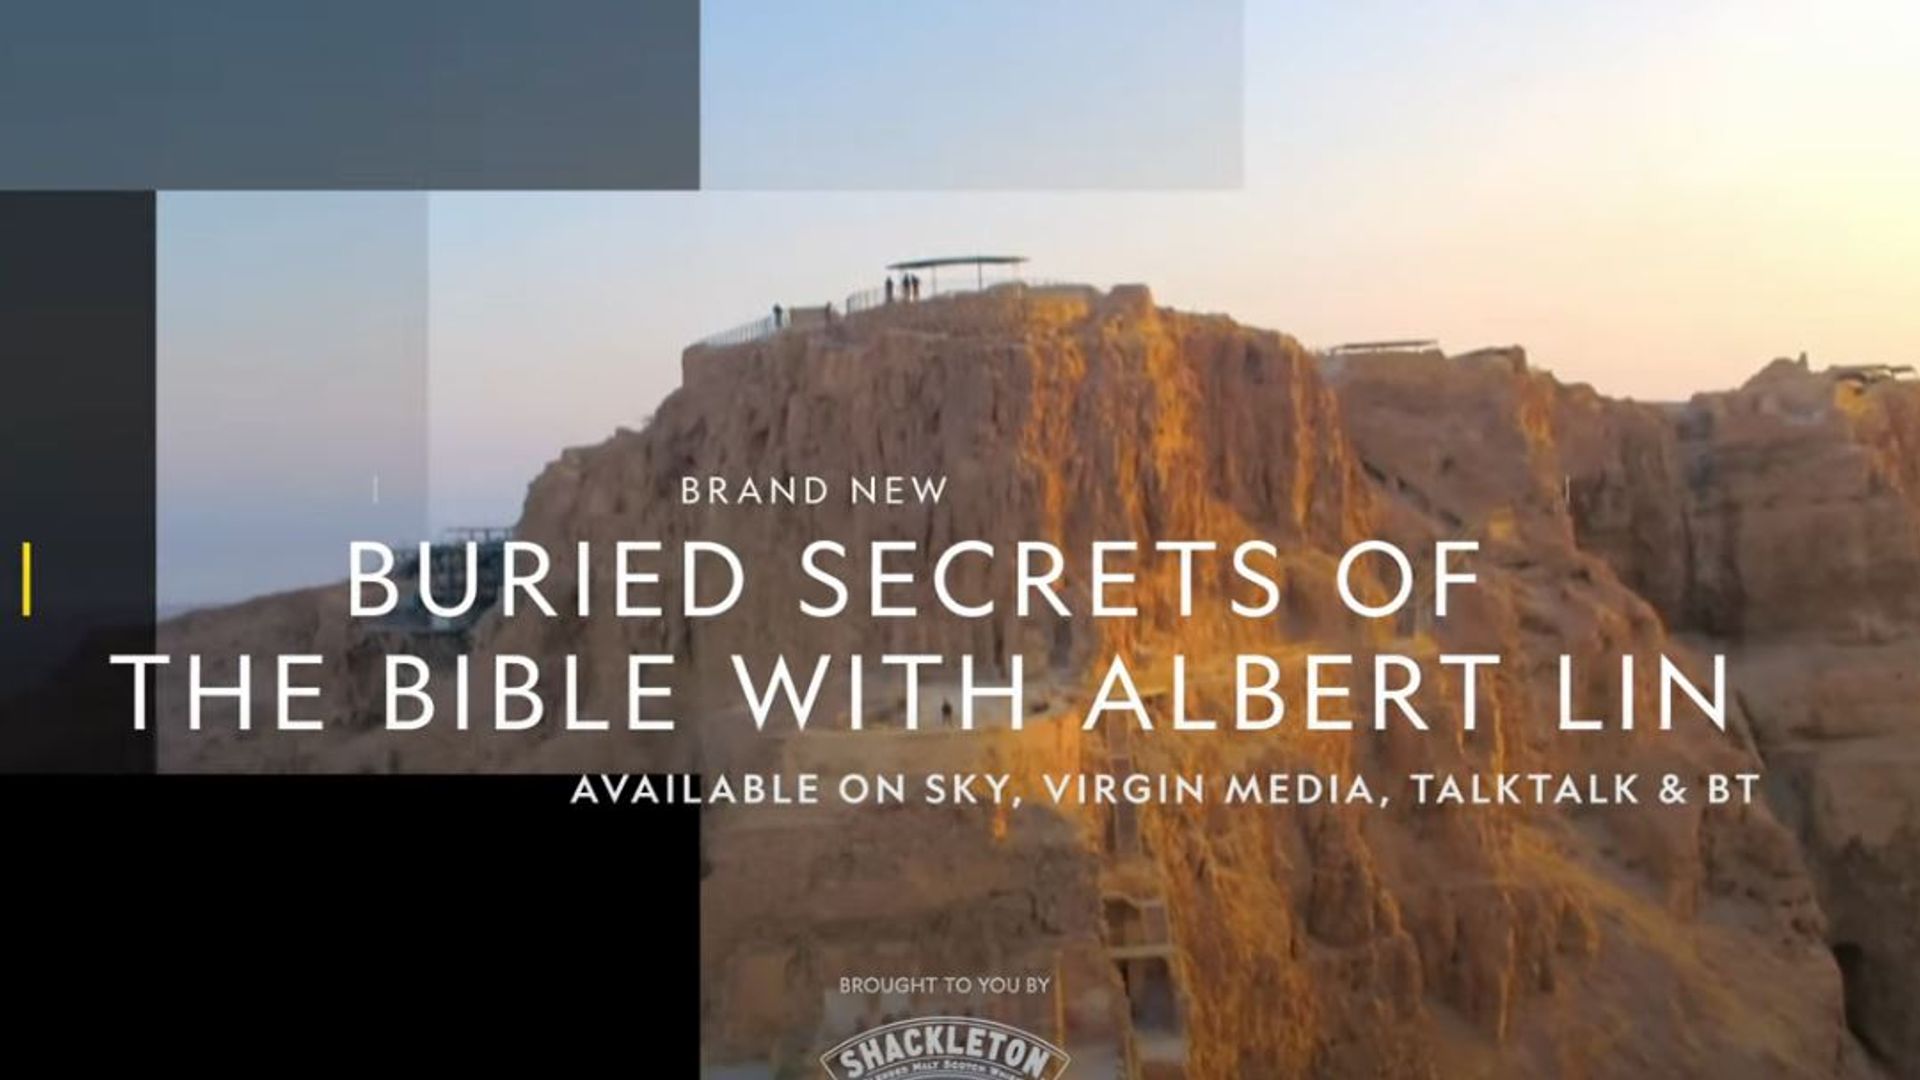 Buried Secrets of the Bible with Albert Lin background